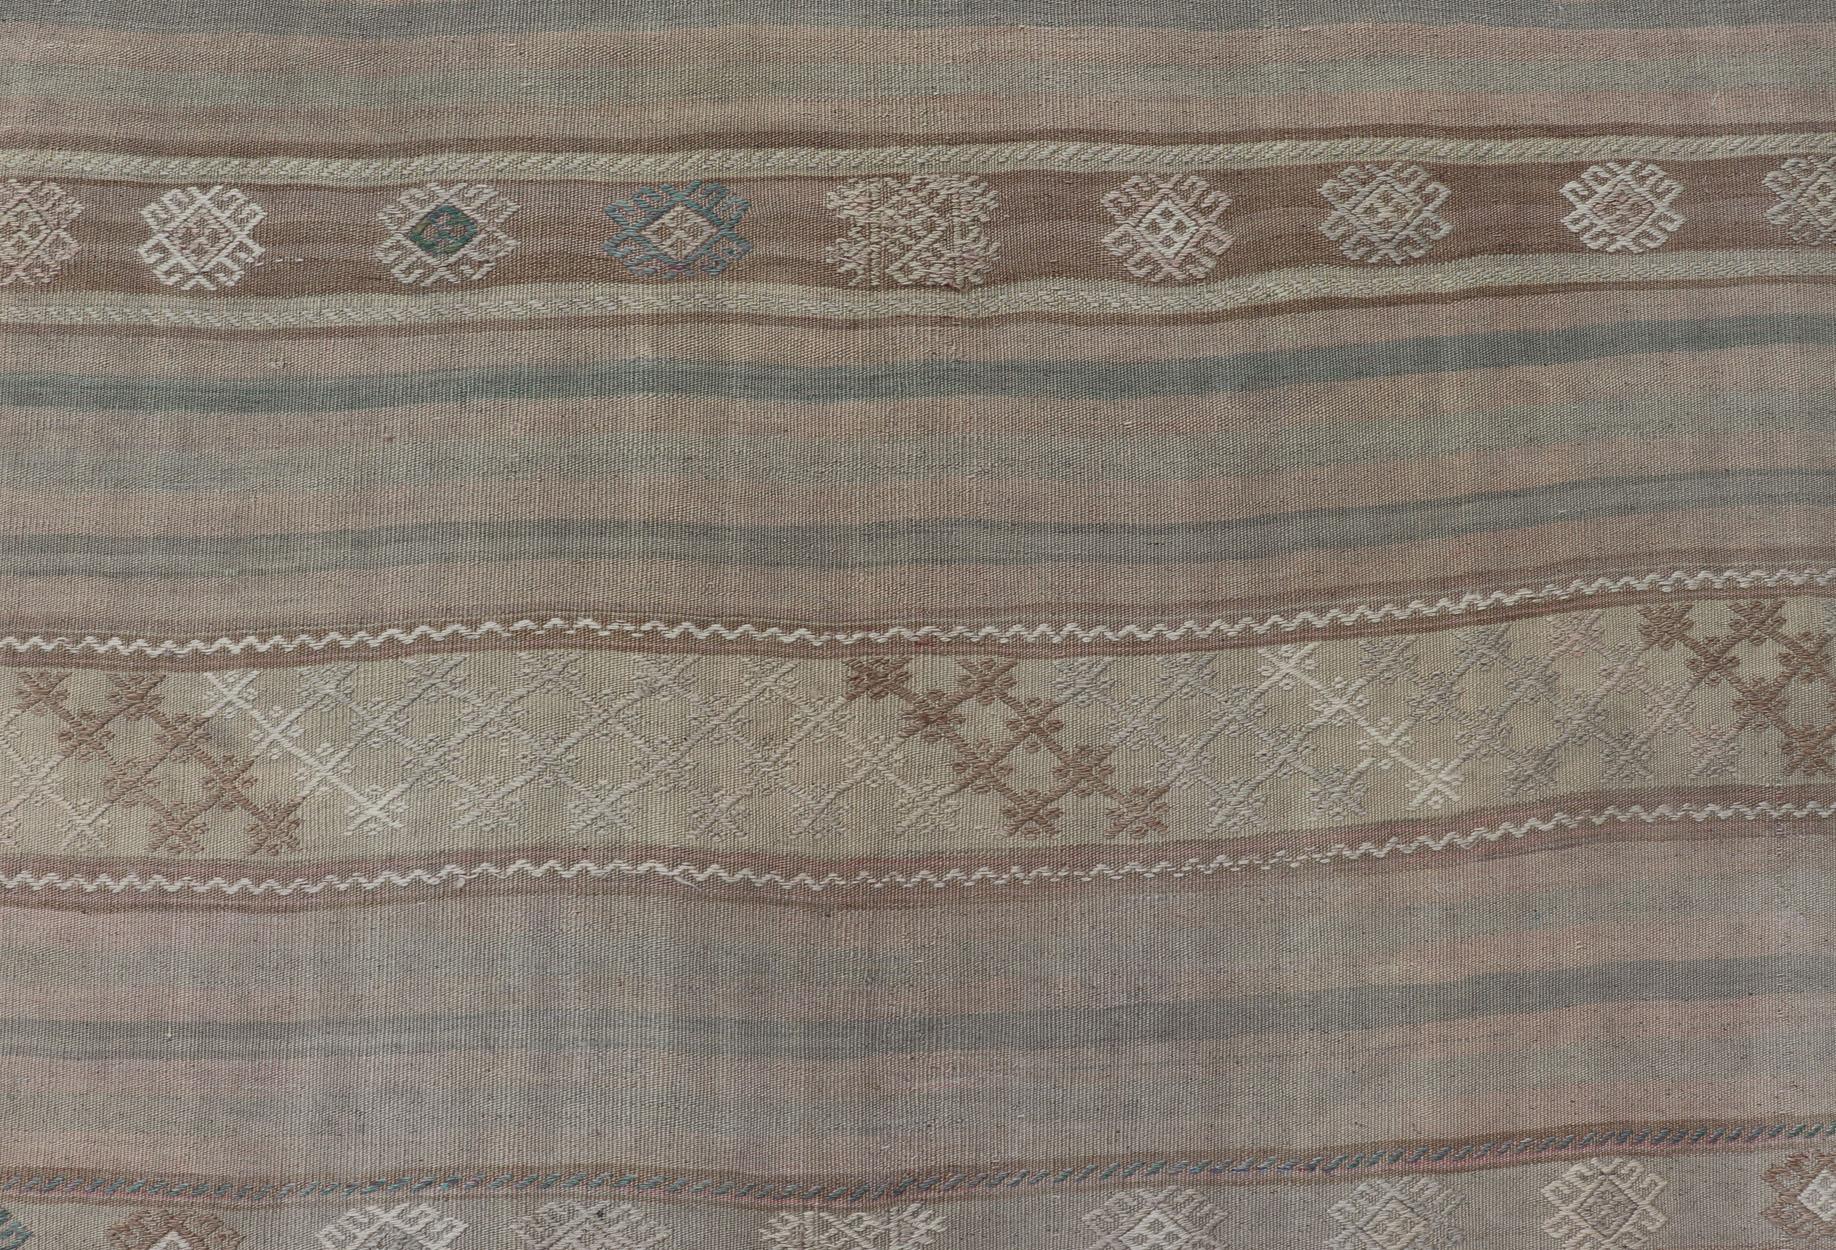 Flat-Weave Turkish Kilim with Embroideries in Earthy Tones and Hints of Pink For Sale 4